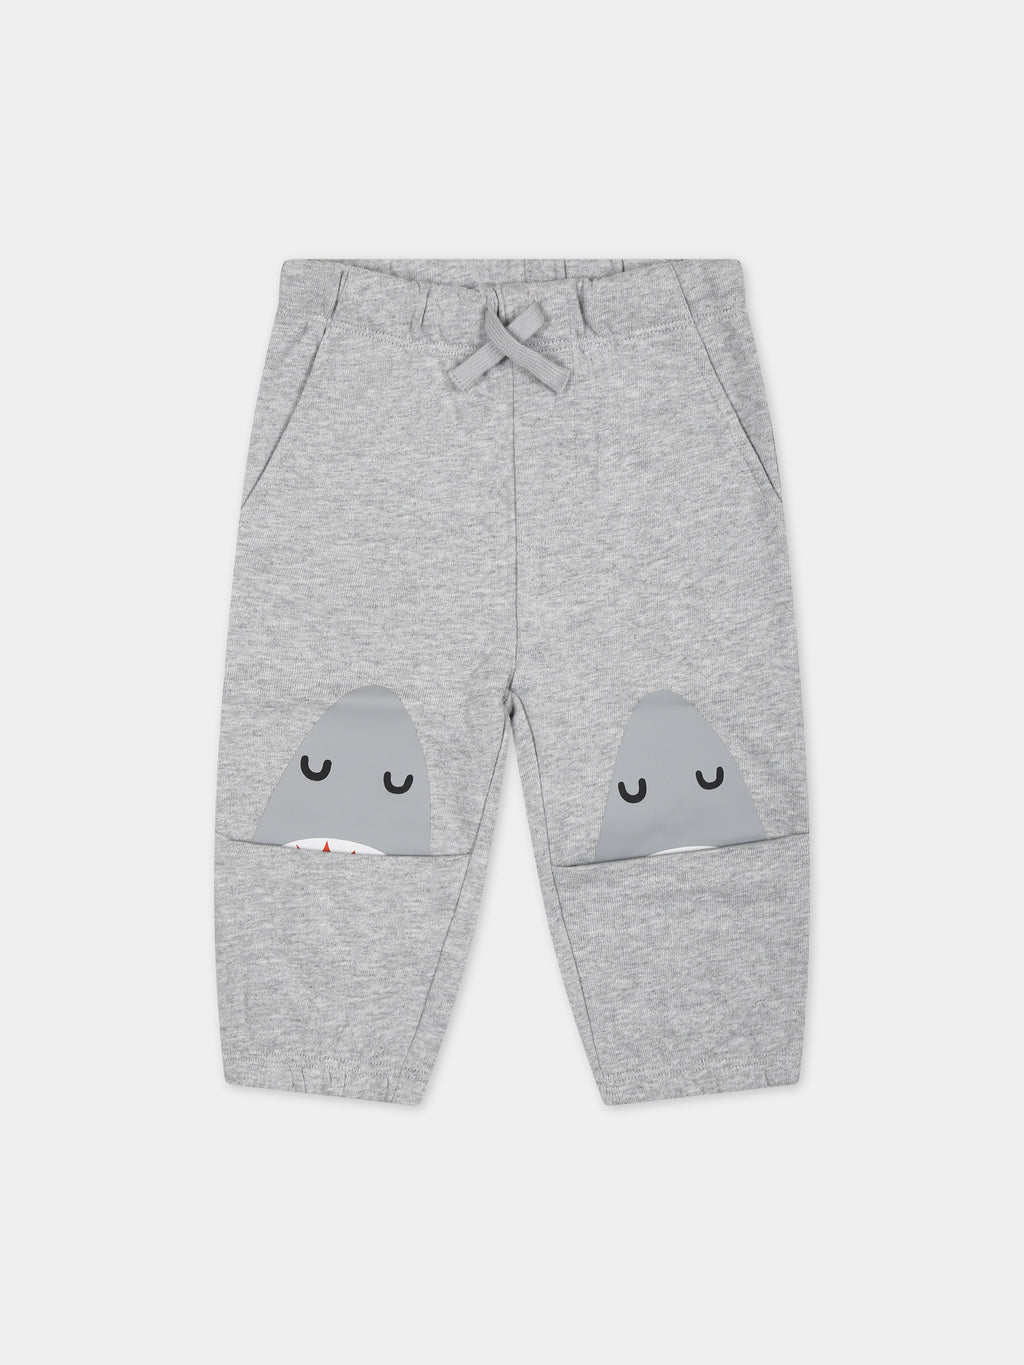 Gray trousers for baby boy with shark fin print